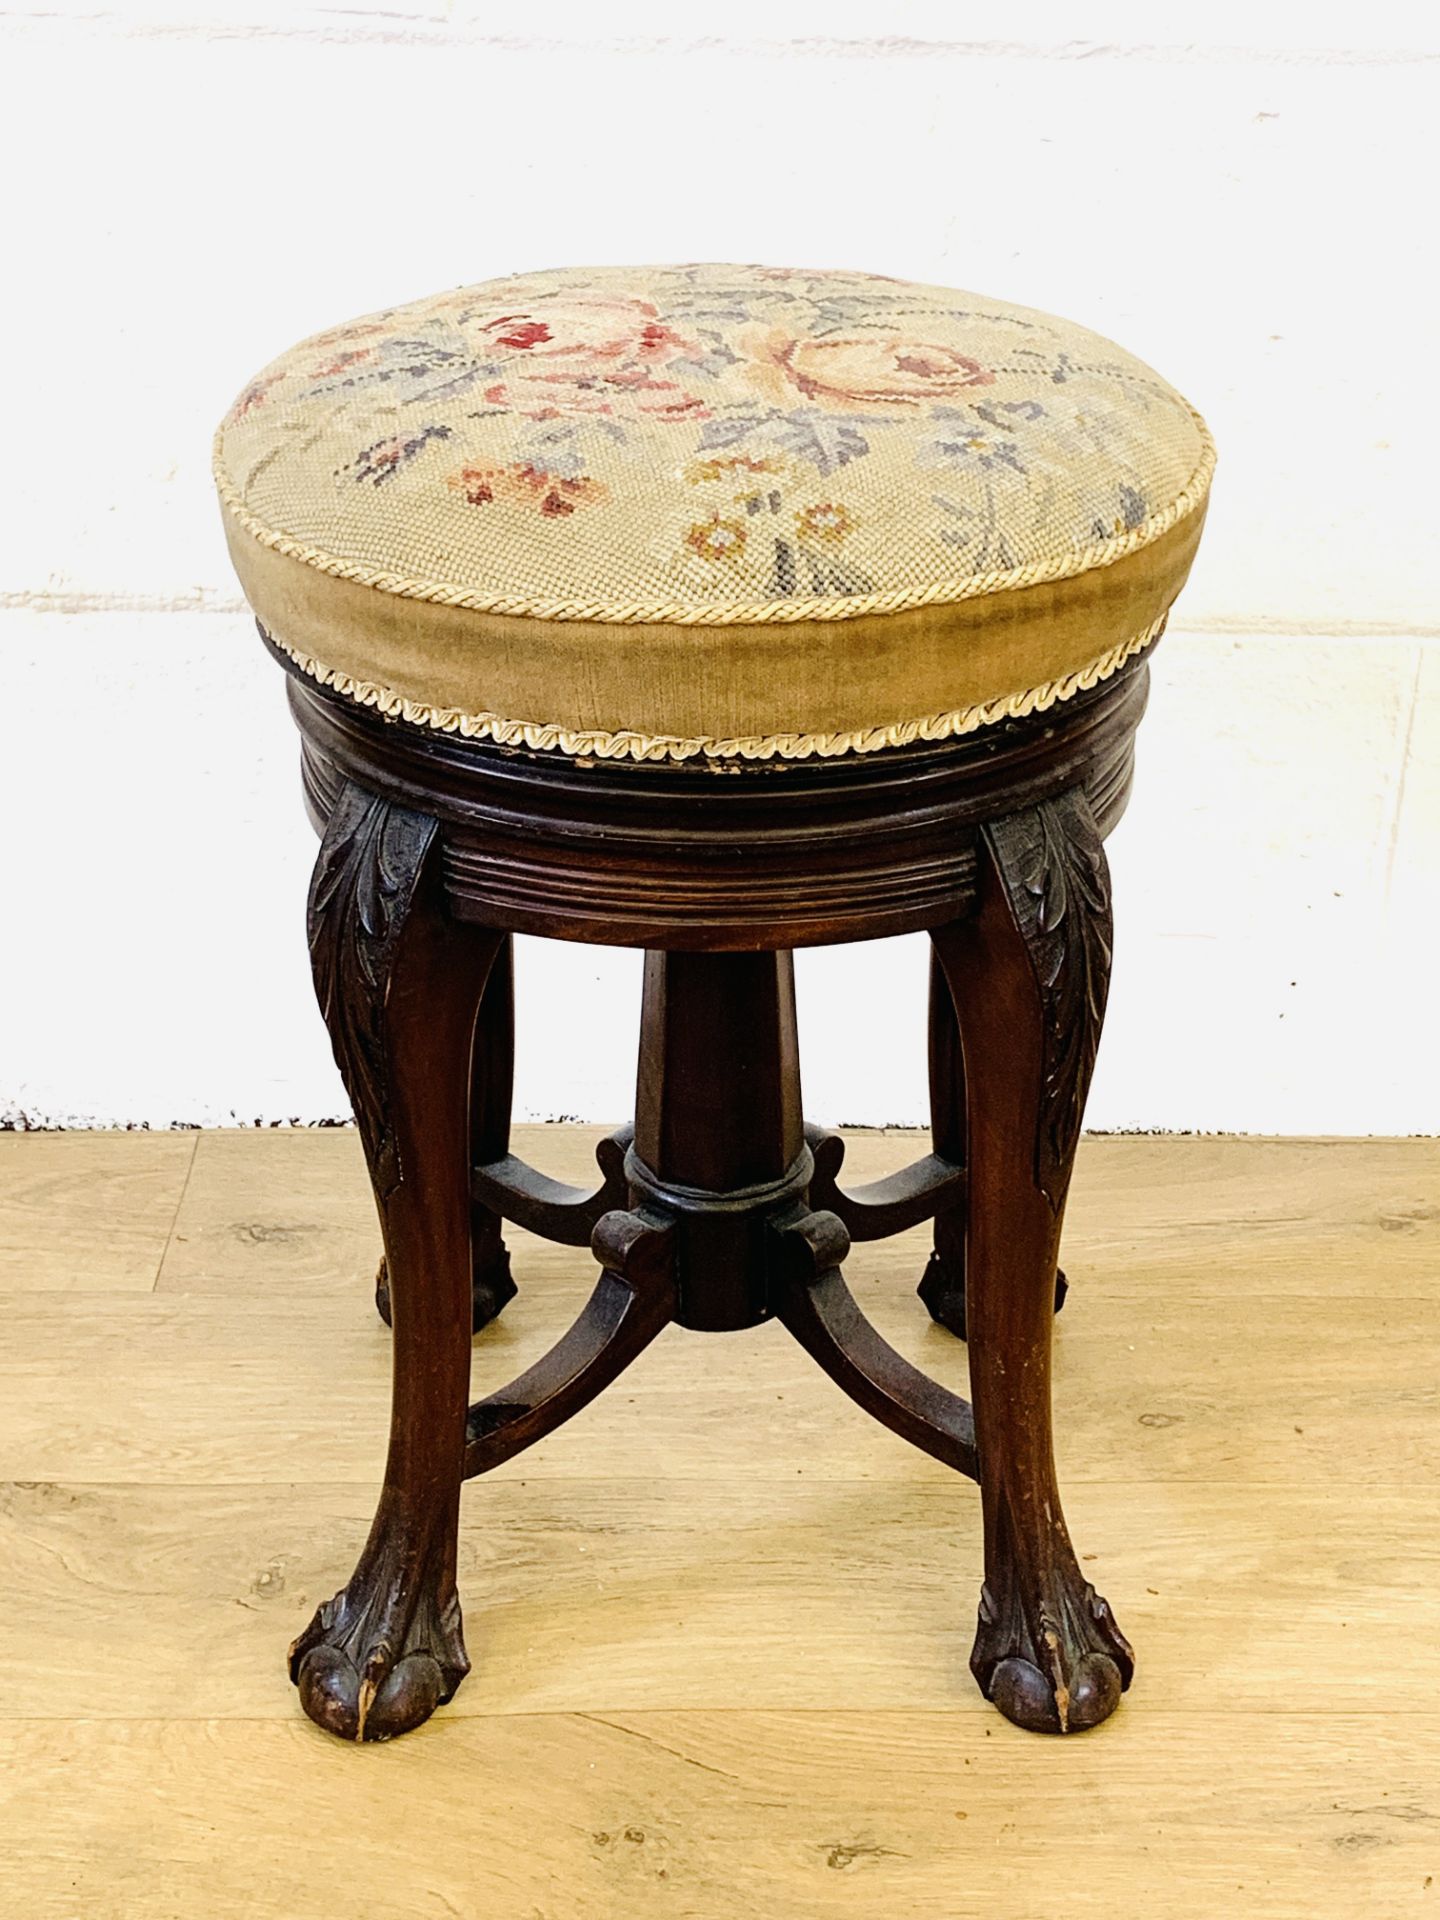 Adjustable stool with tapestry seat - Image 3 of 3